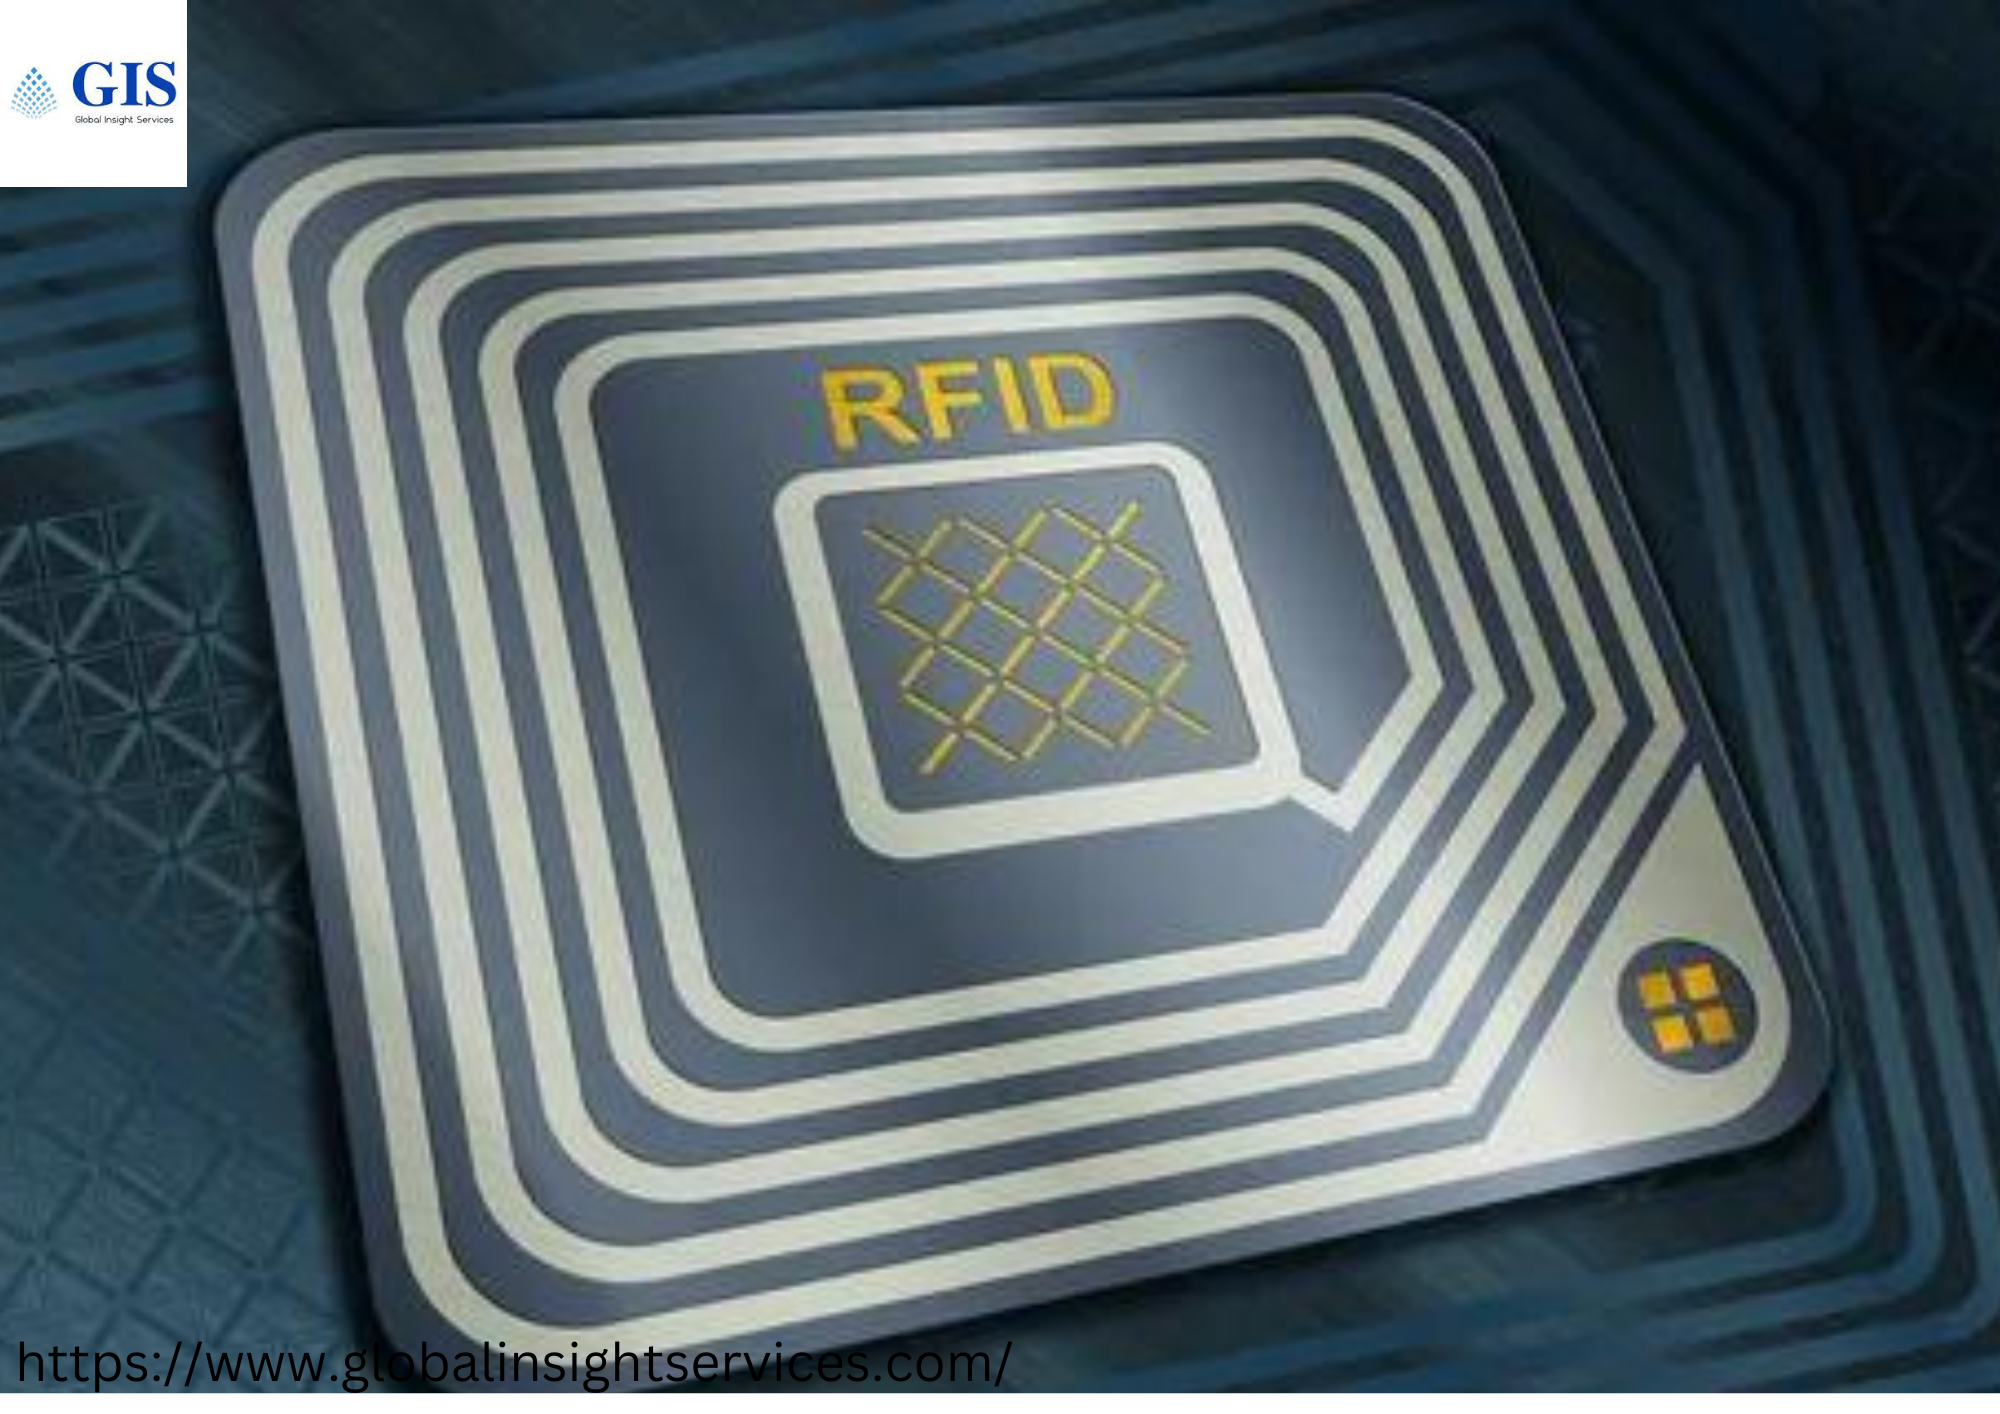 Unraveling the Potential: The Current Landscape and Future Trends of the Radio Frequency Identification (RFID) Market